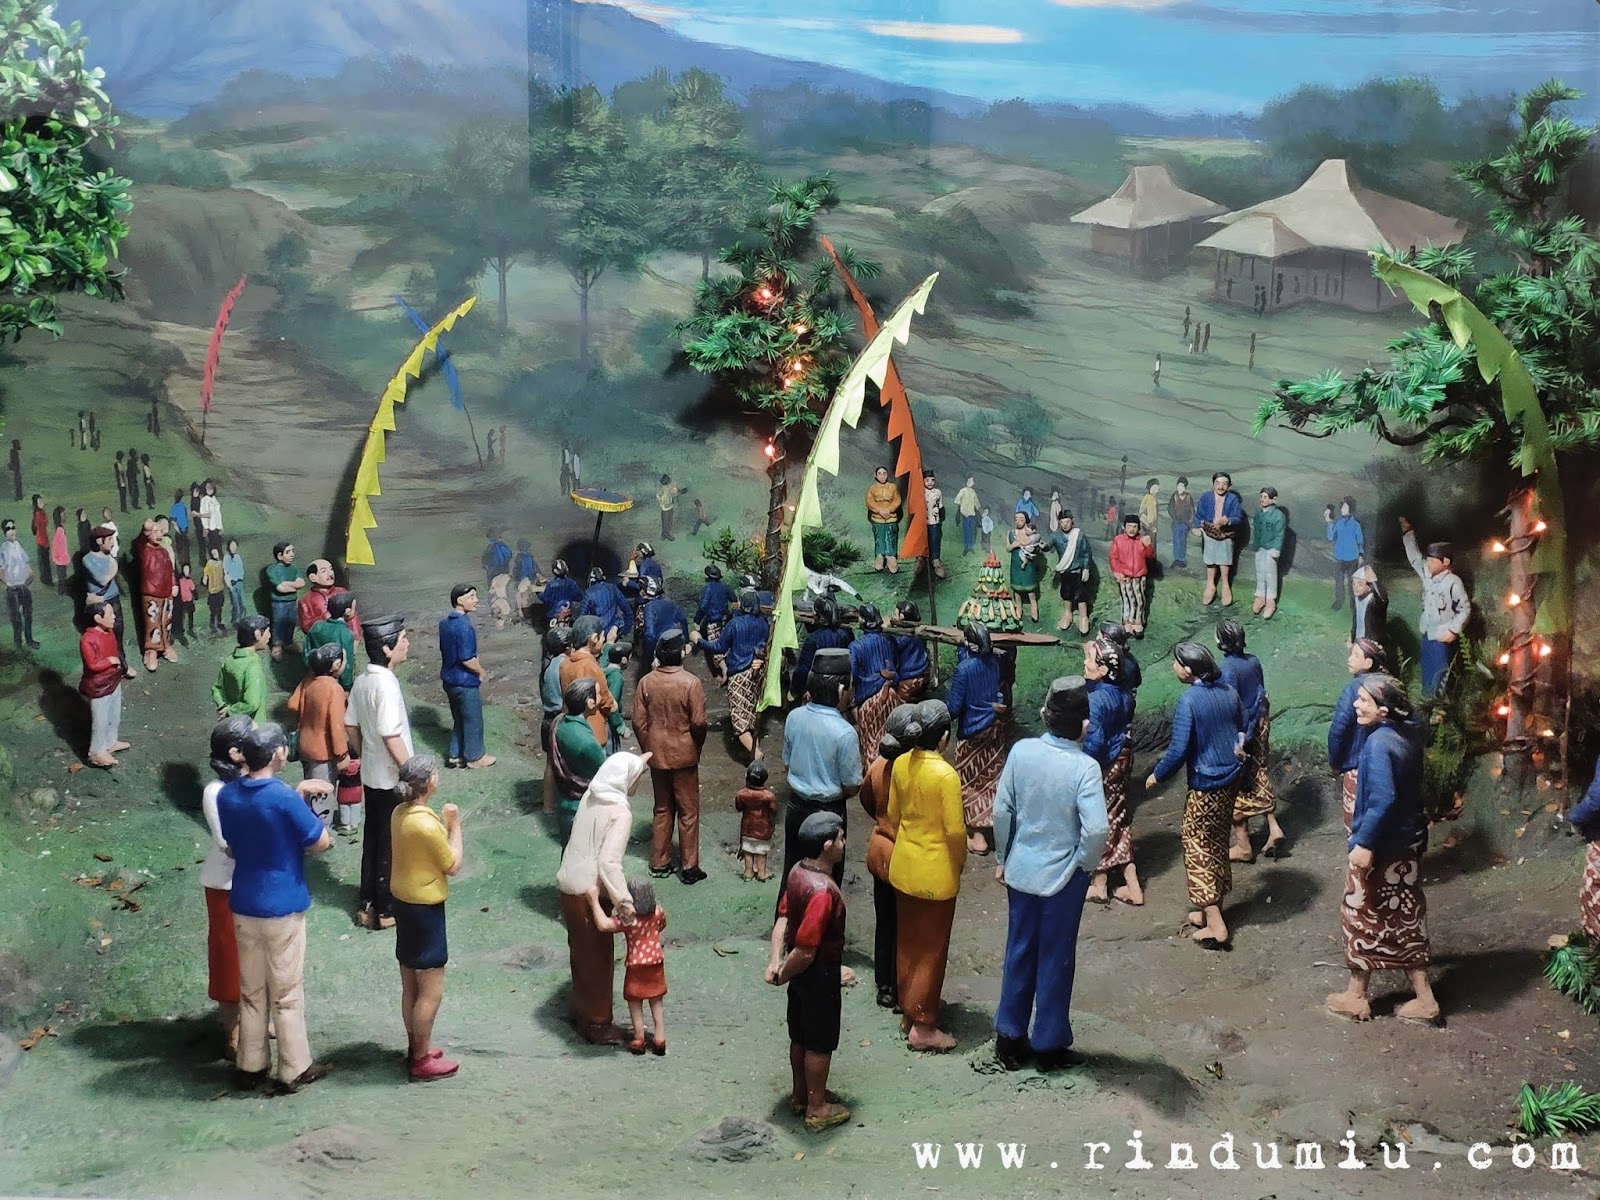 A diorama of Sedekah Gunung Merapi in which people walk in a long march bringing their alms and a cow's head in Hamong Wardoyo in Boyolali in the northeast of Jogja